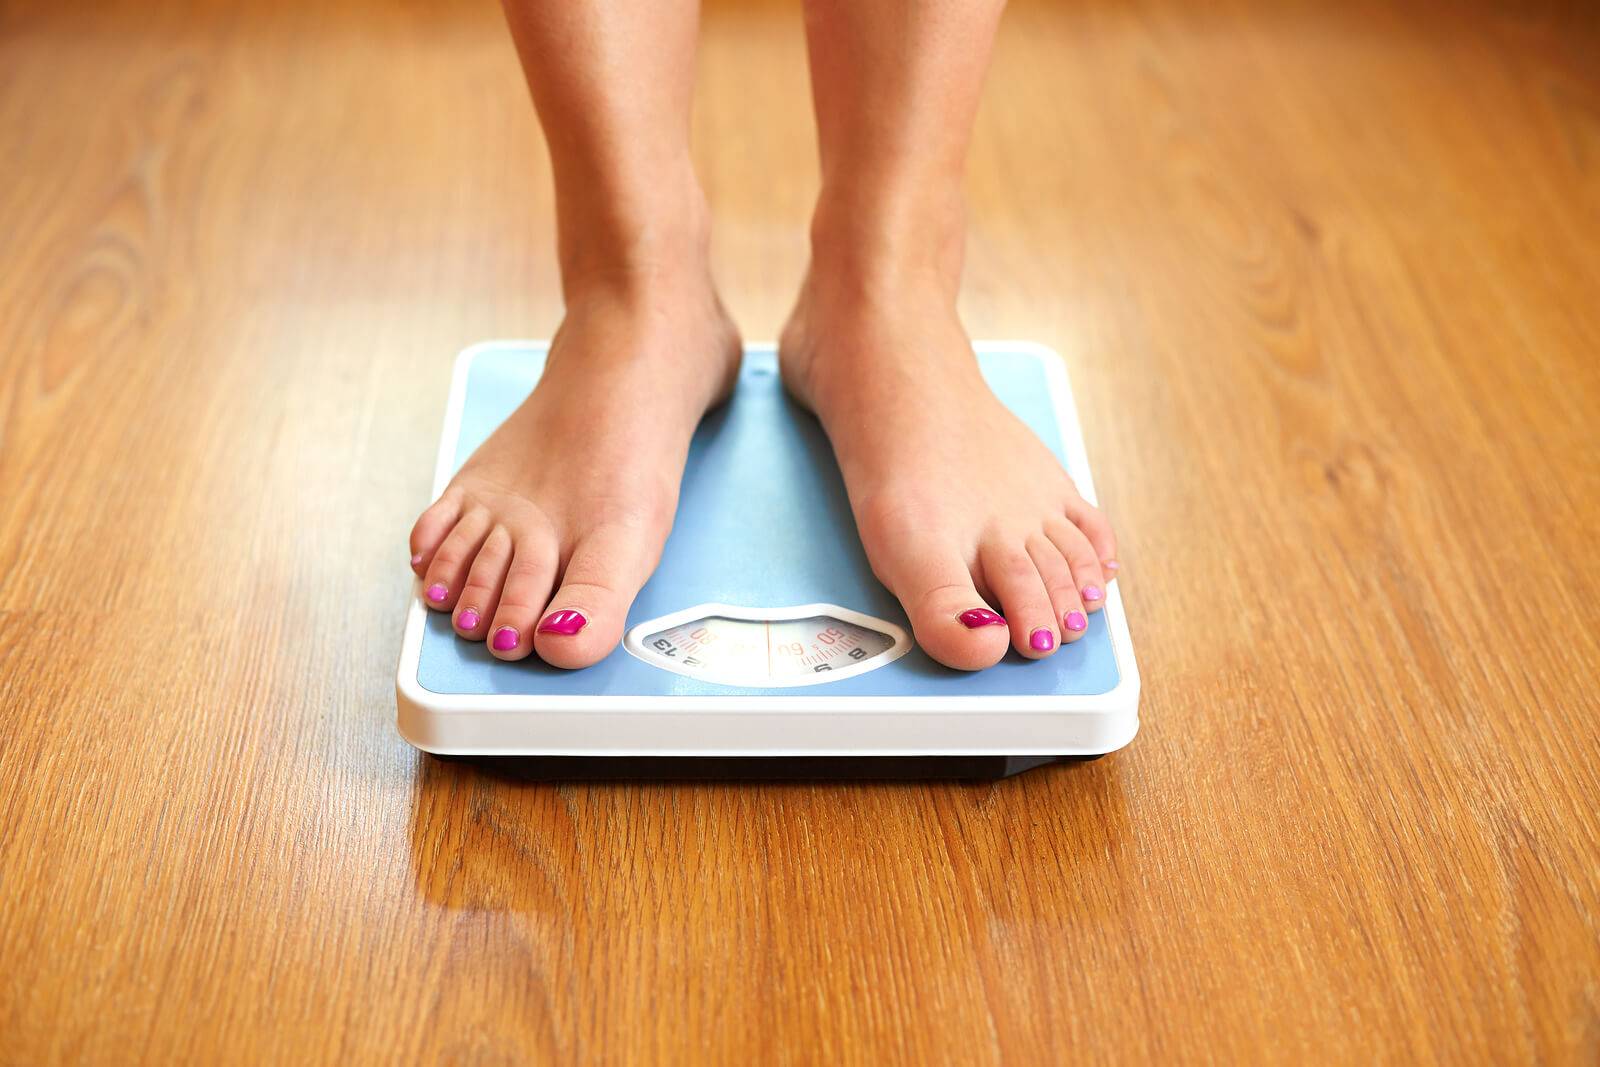 Obesity Drugs and Teens Health